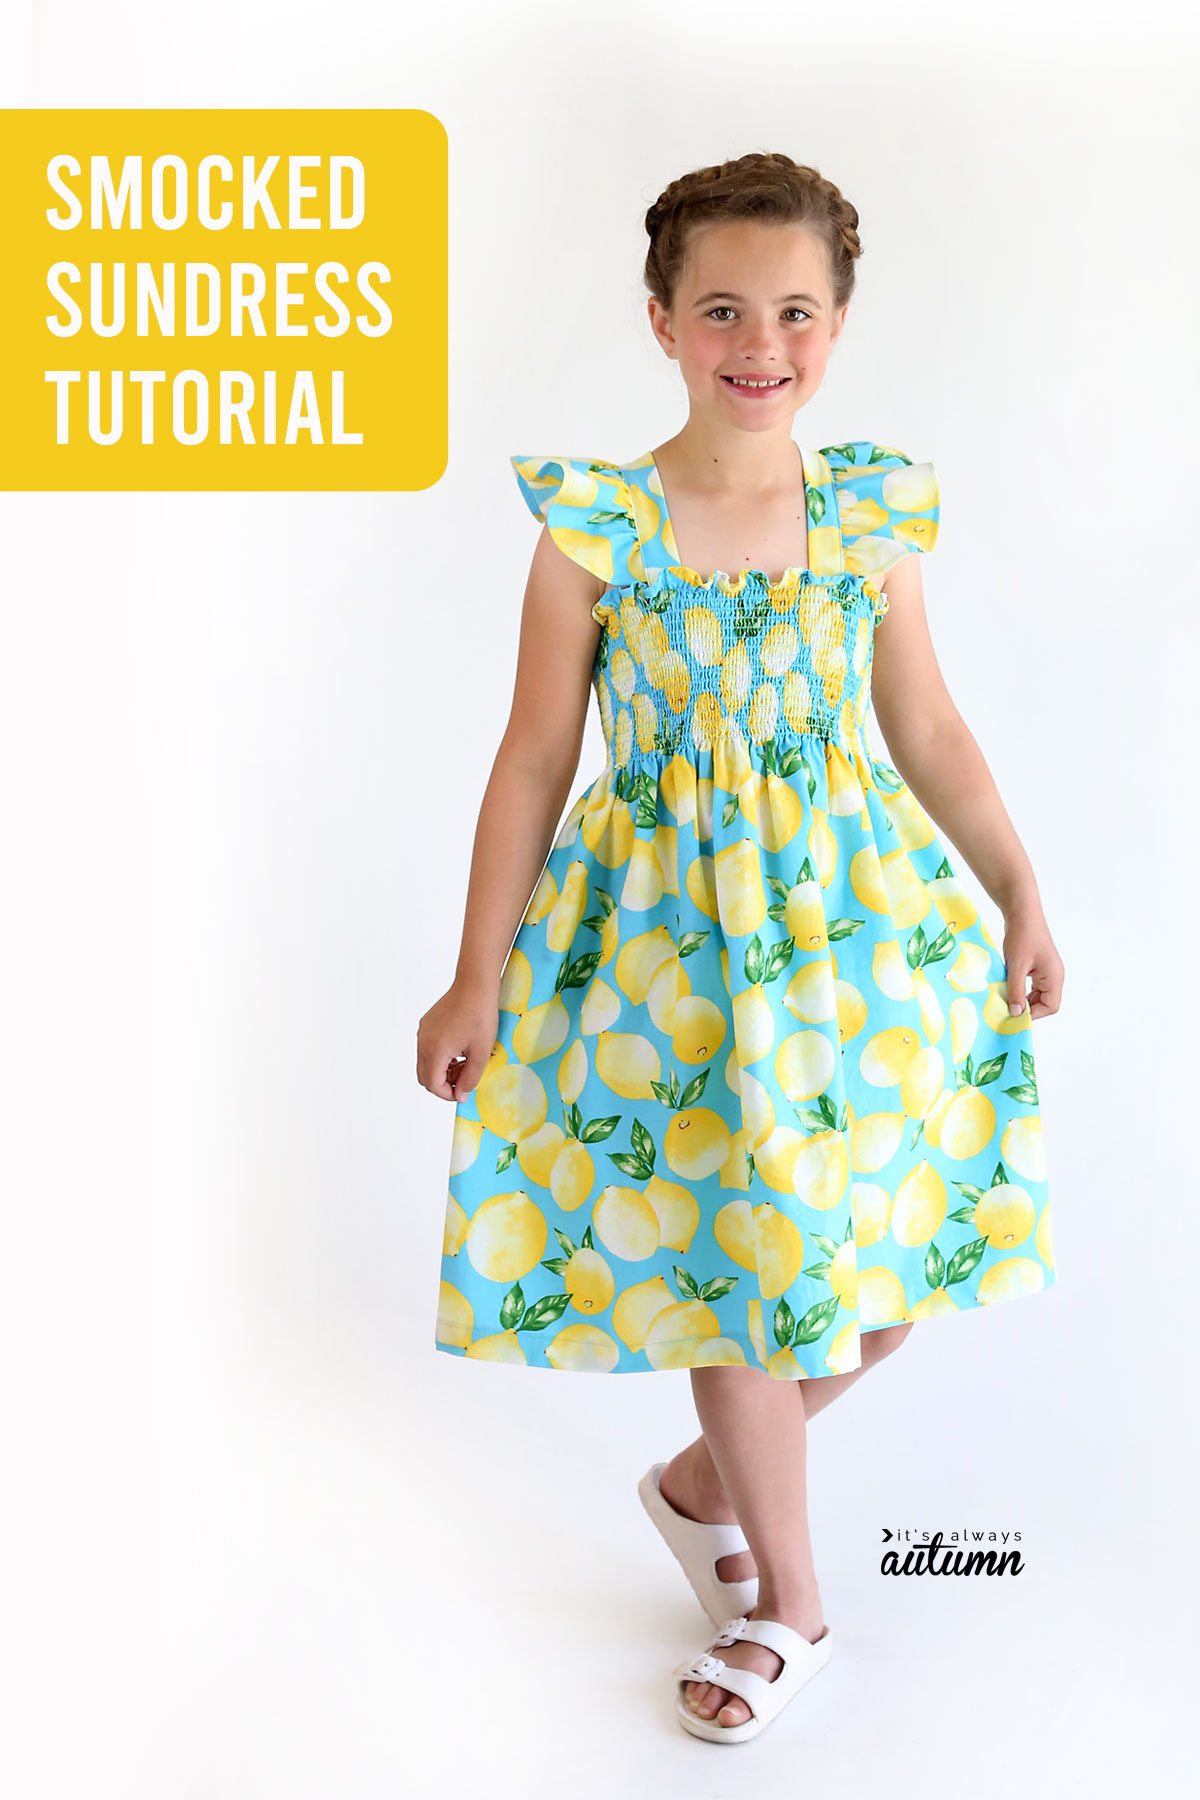 How to make a cute sundress using pre-smocked fabric